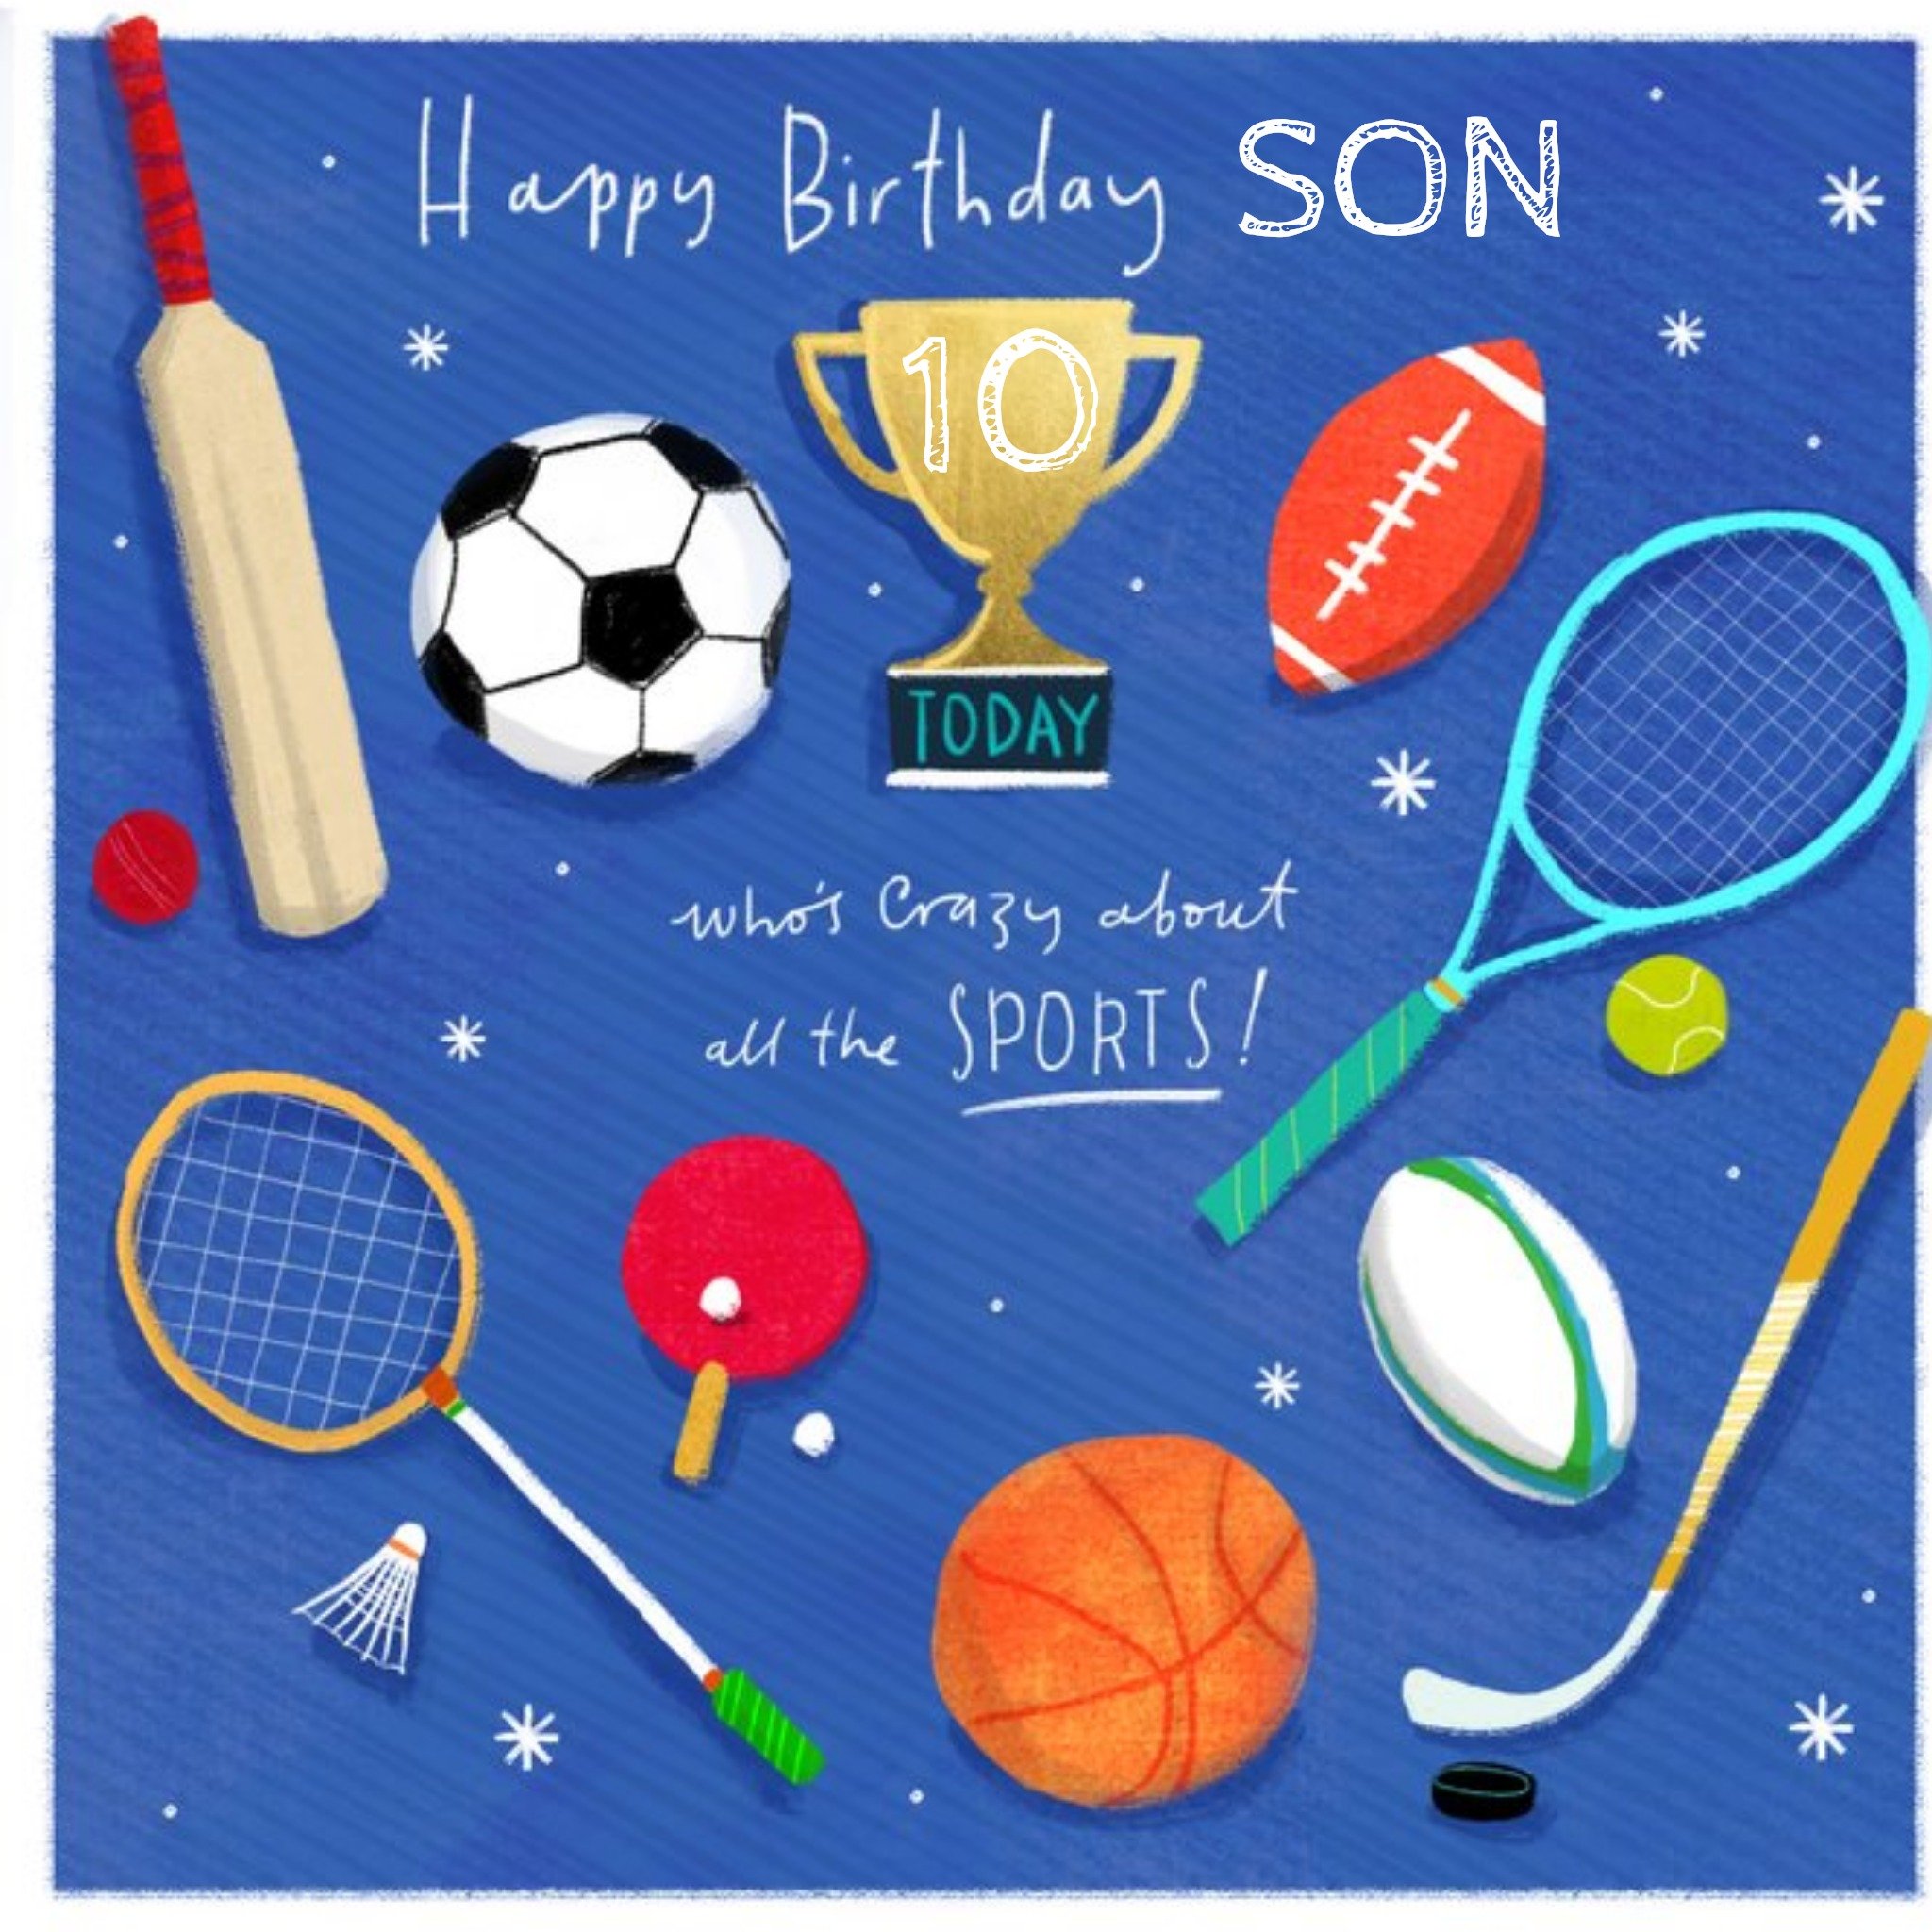 Moonpig Crazy About Sports Illustrated Birthday Card, Square